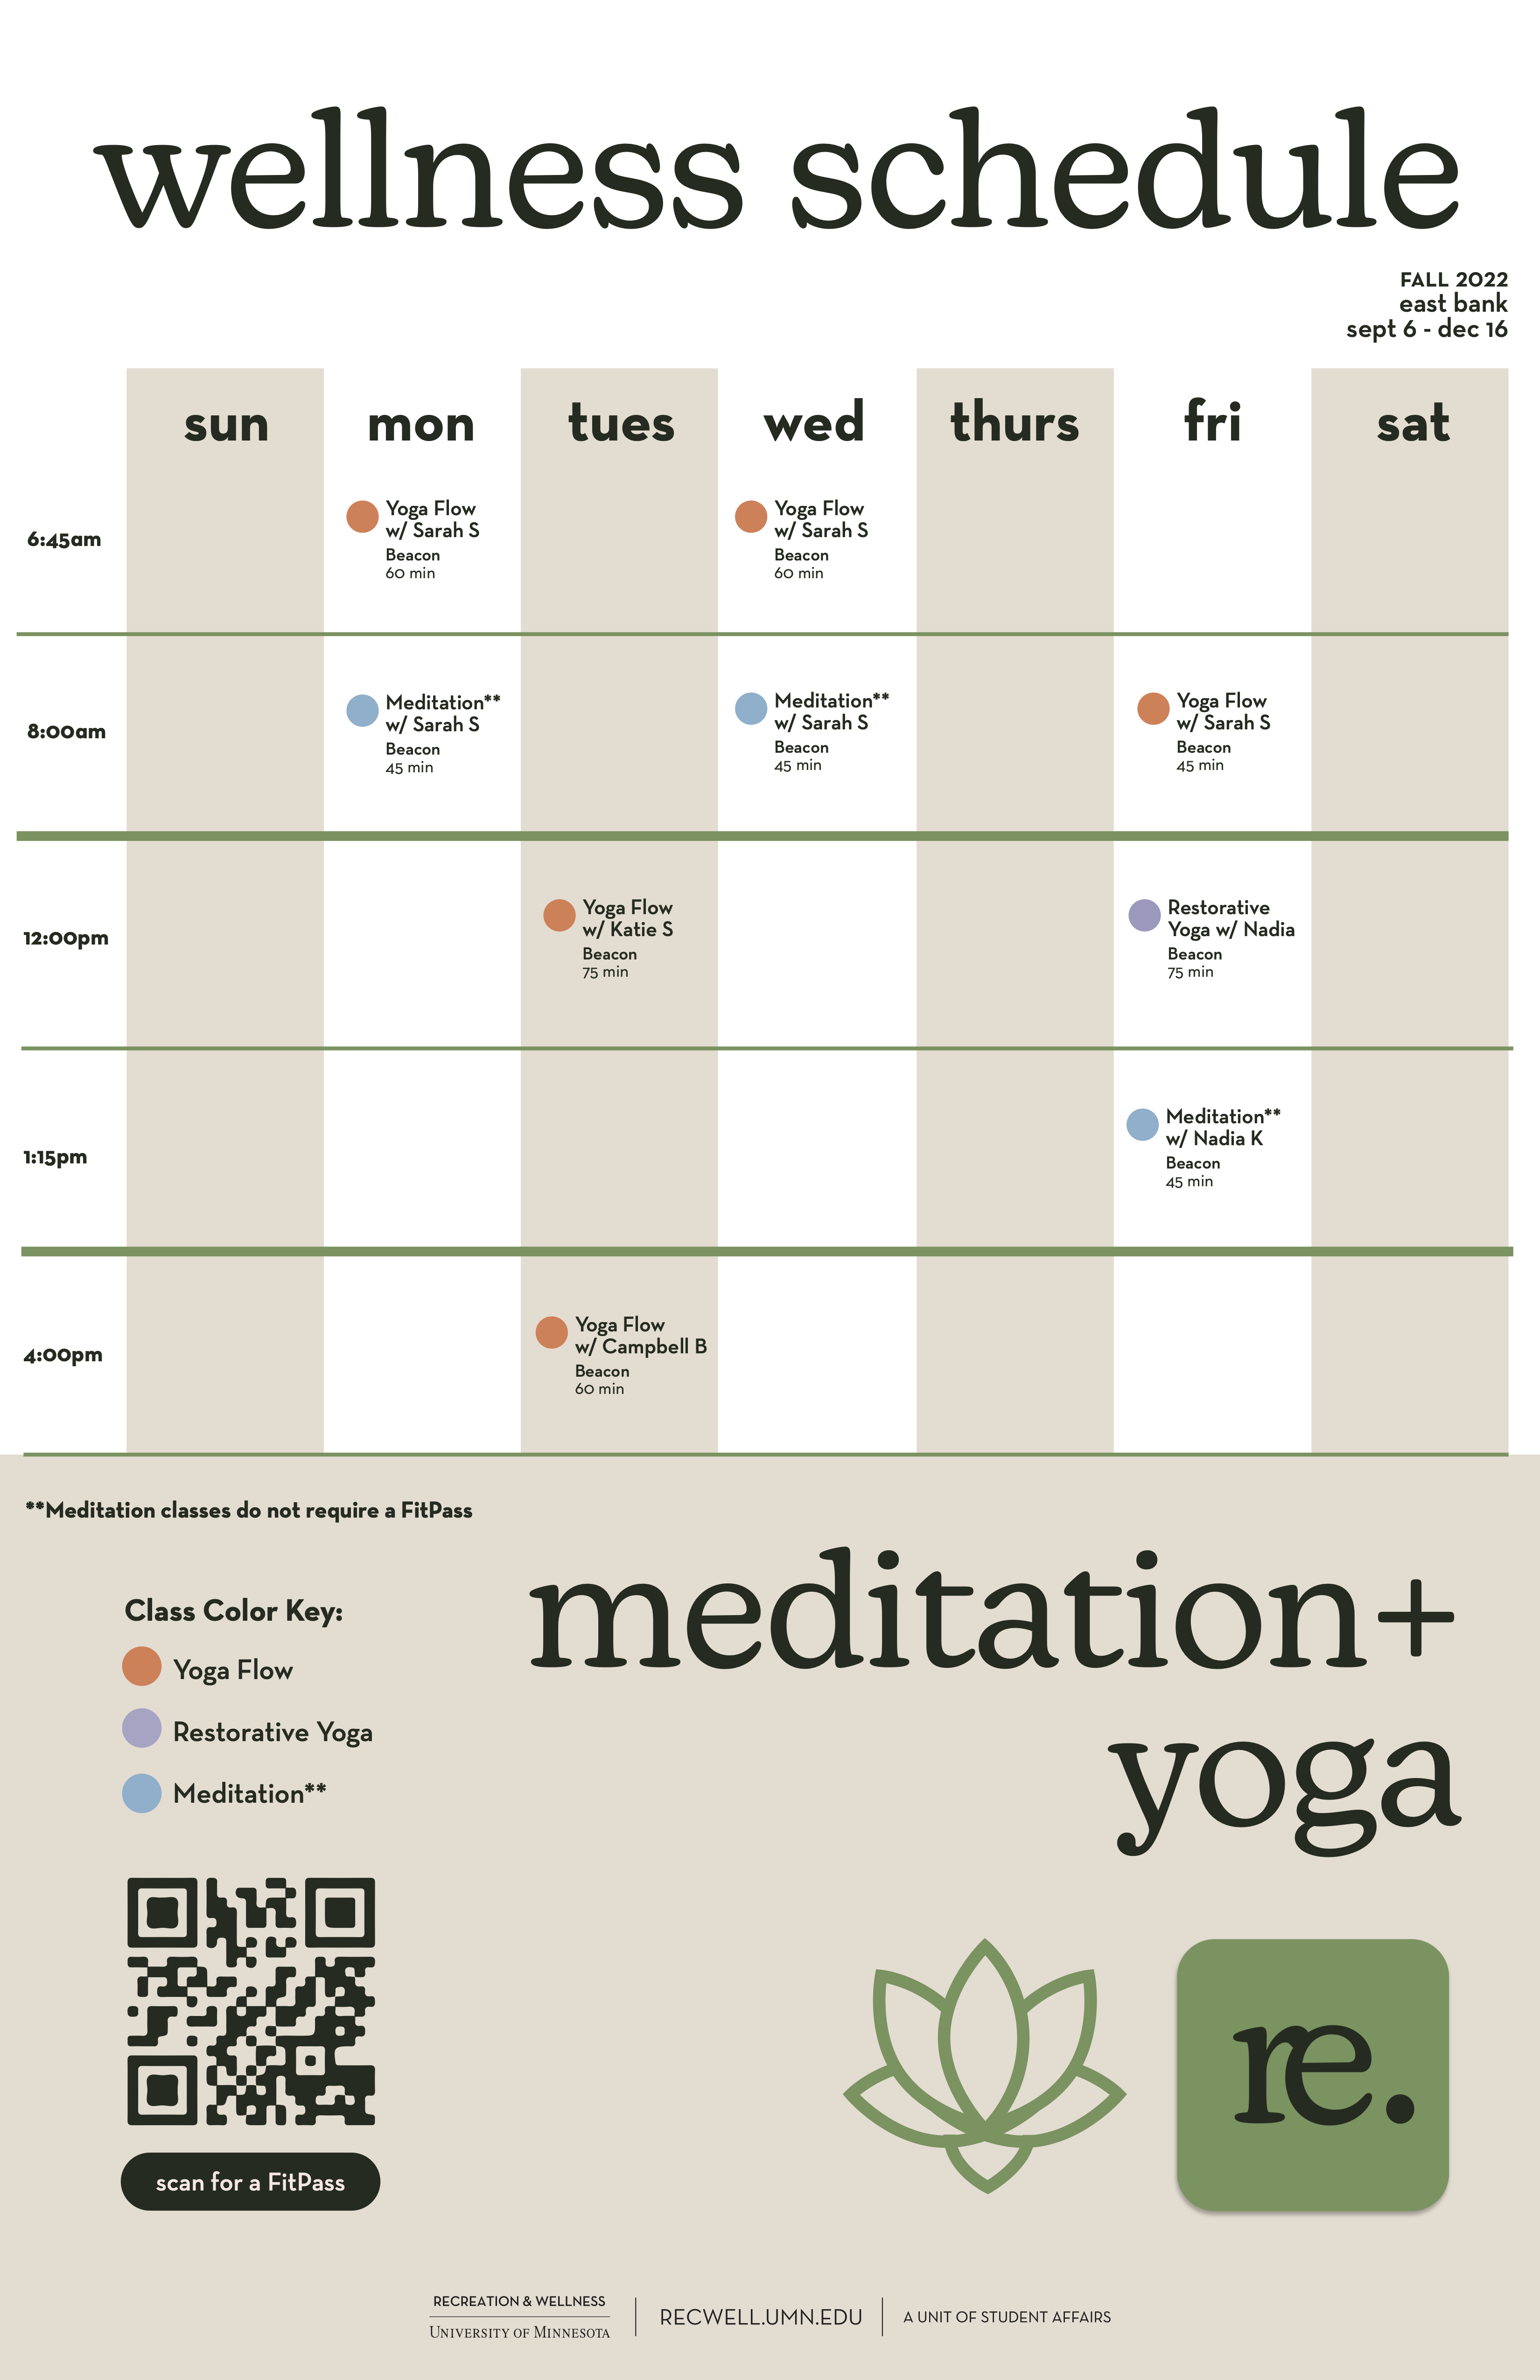 Fall 2022 Wellness schedule for meditation and yoga classes at RecWell